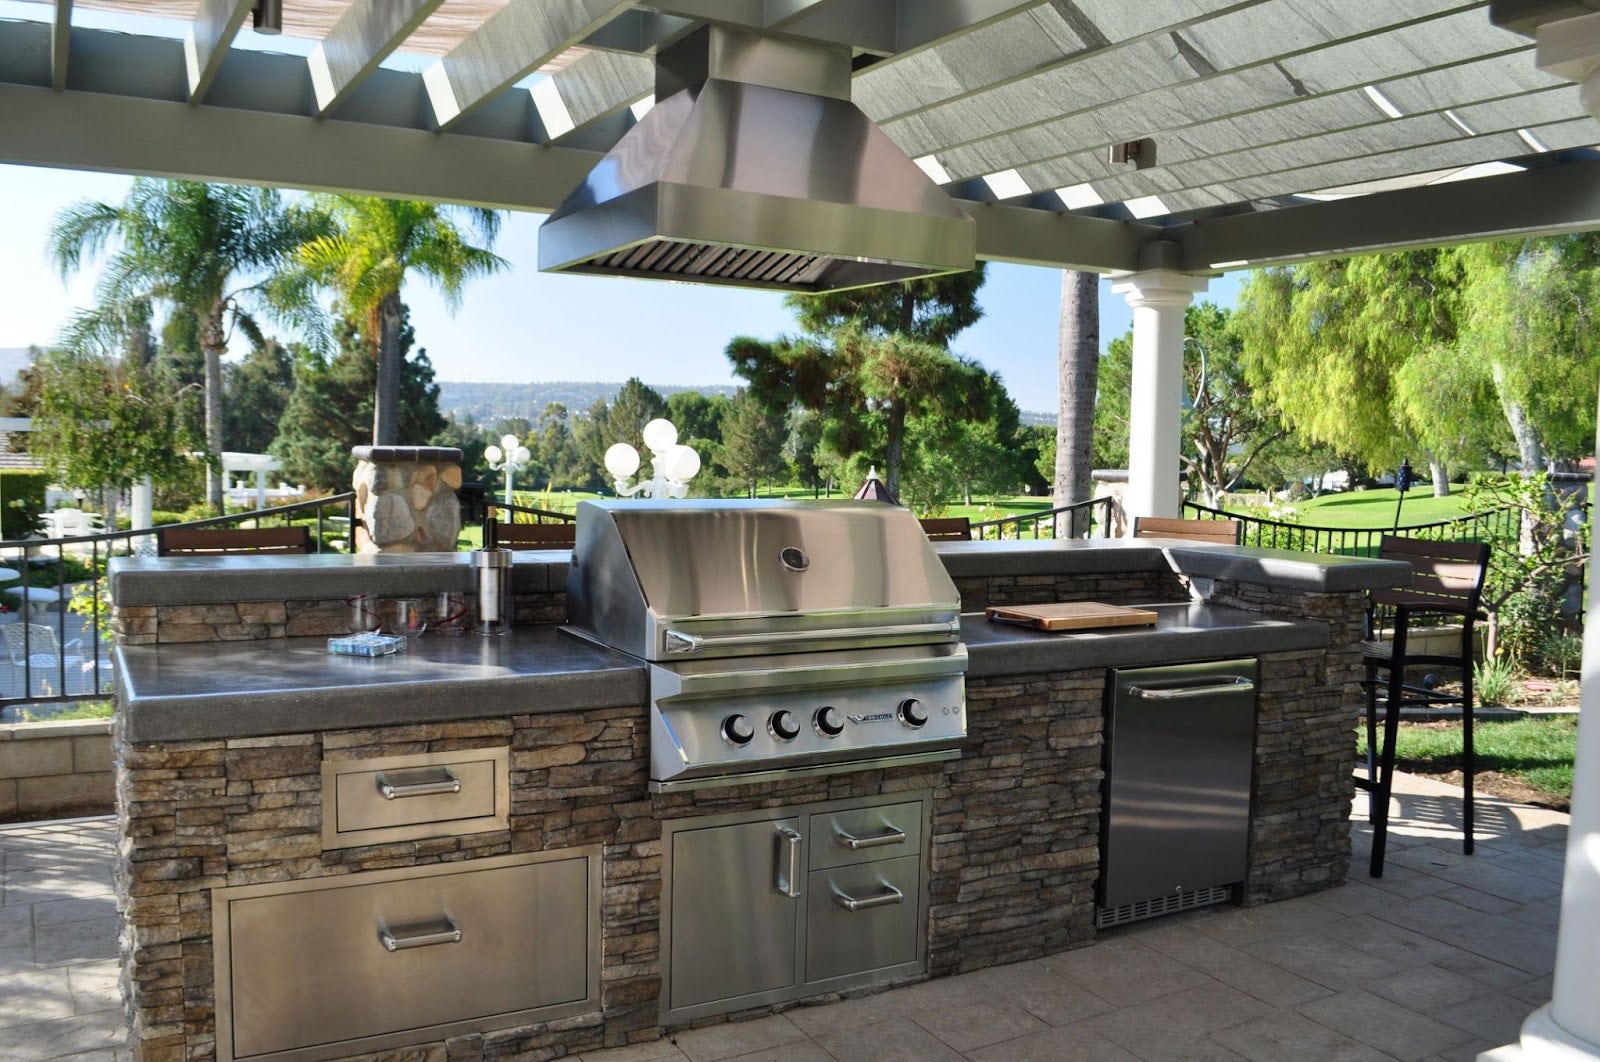 Sunny Escape Kitchen: This open-air kitchen is perfect for easy living. The Proline PLJI 103.42 hood vents smoke while you cook and dine under the sunshine. Stone accents and stainless steel appliances add a touch of style to this laid-back entertaining space. - Proline Range Hoods - prolinerangehoods.com 